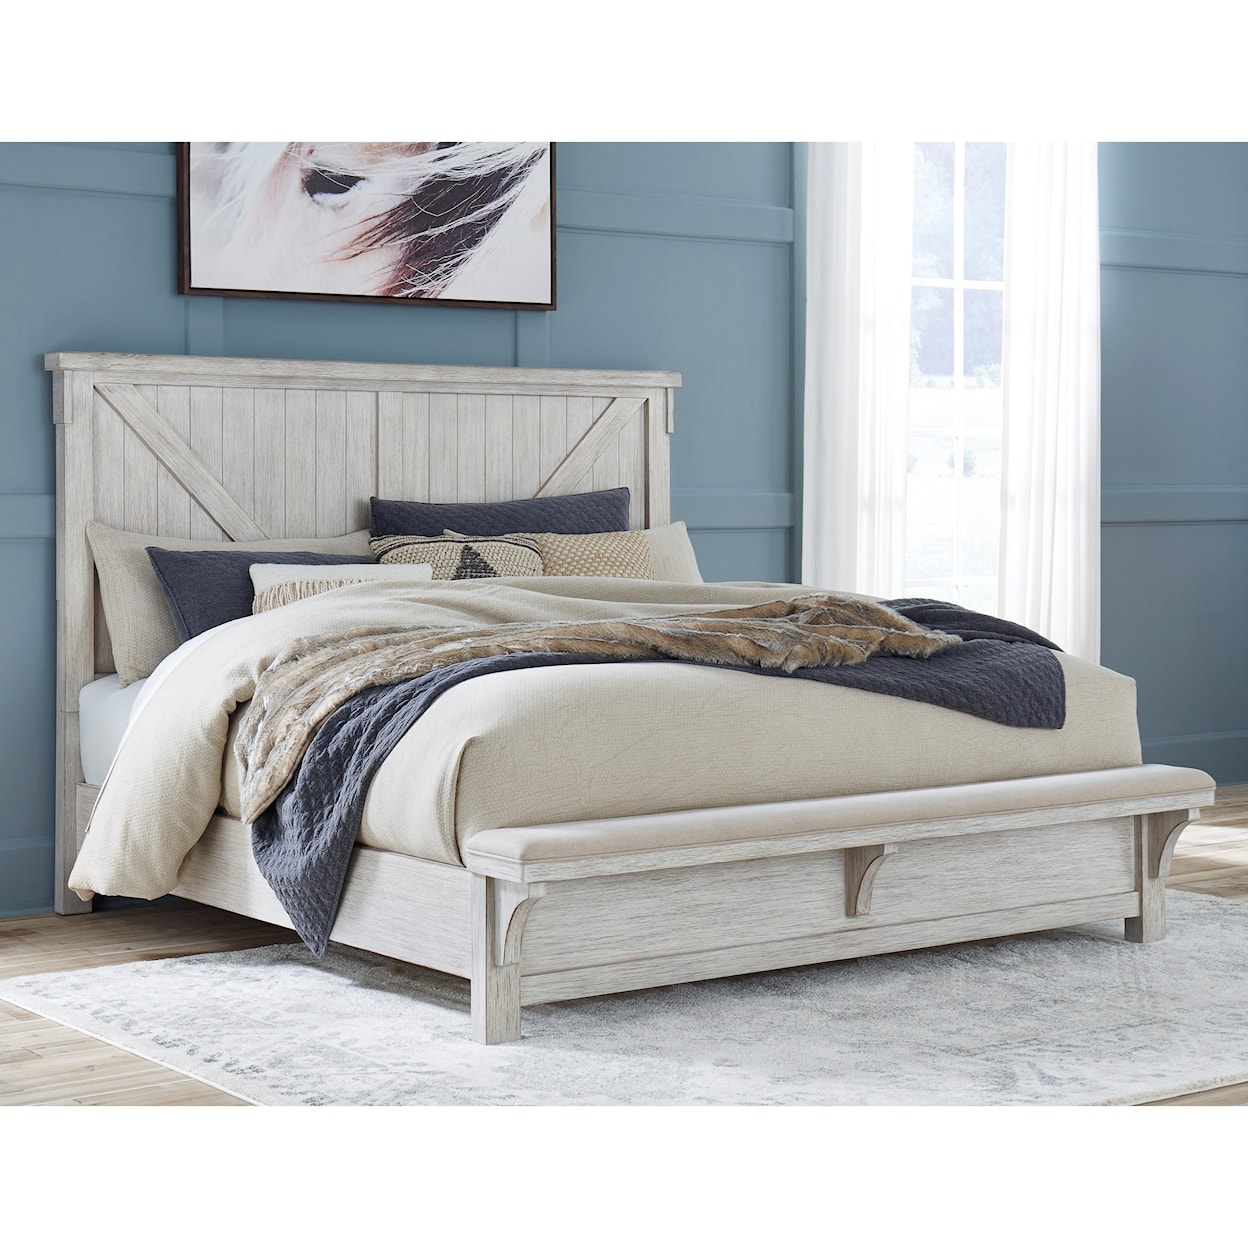 Signature Design Brashland Queen Bed with Footboard Bench